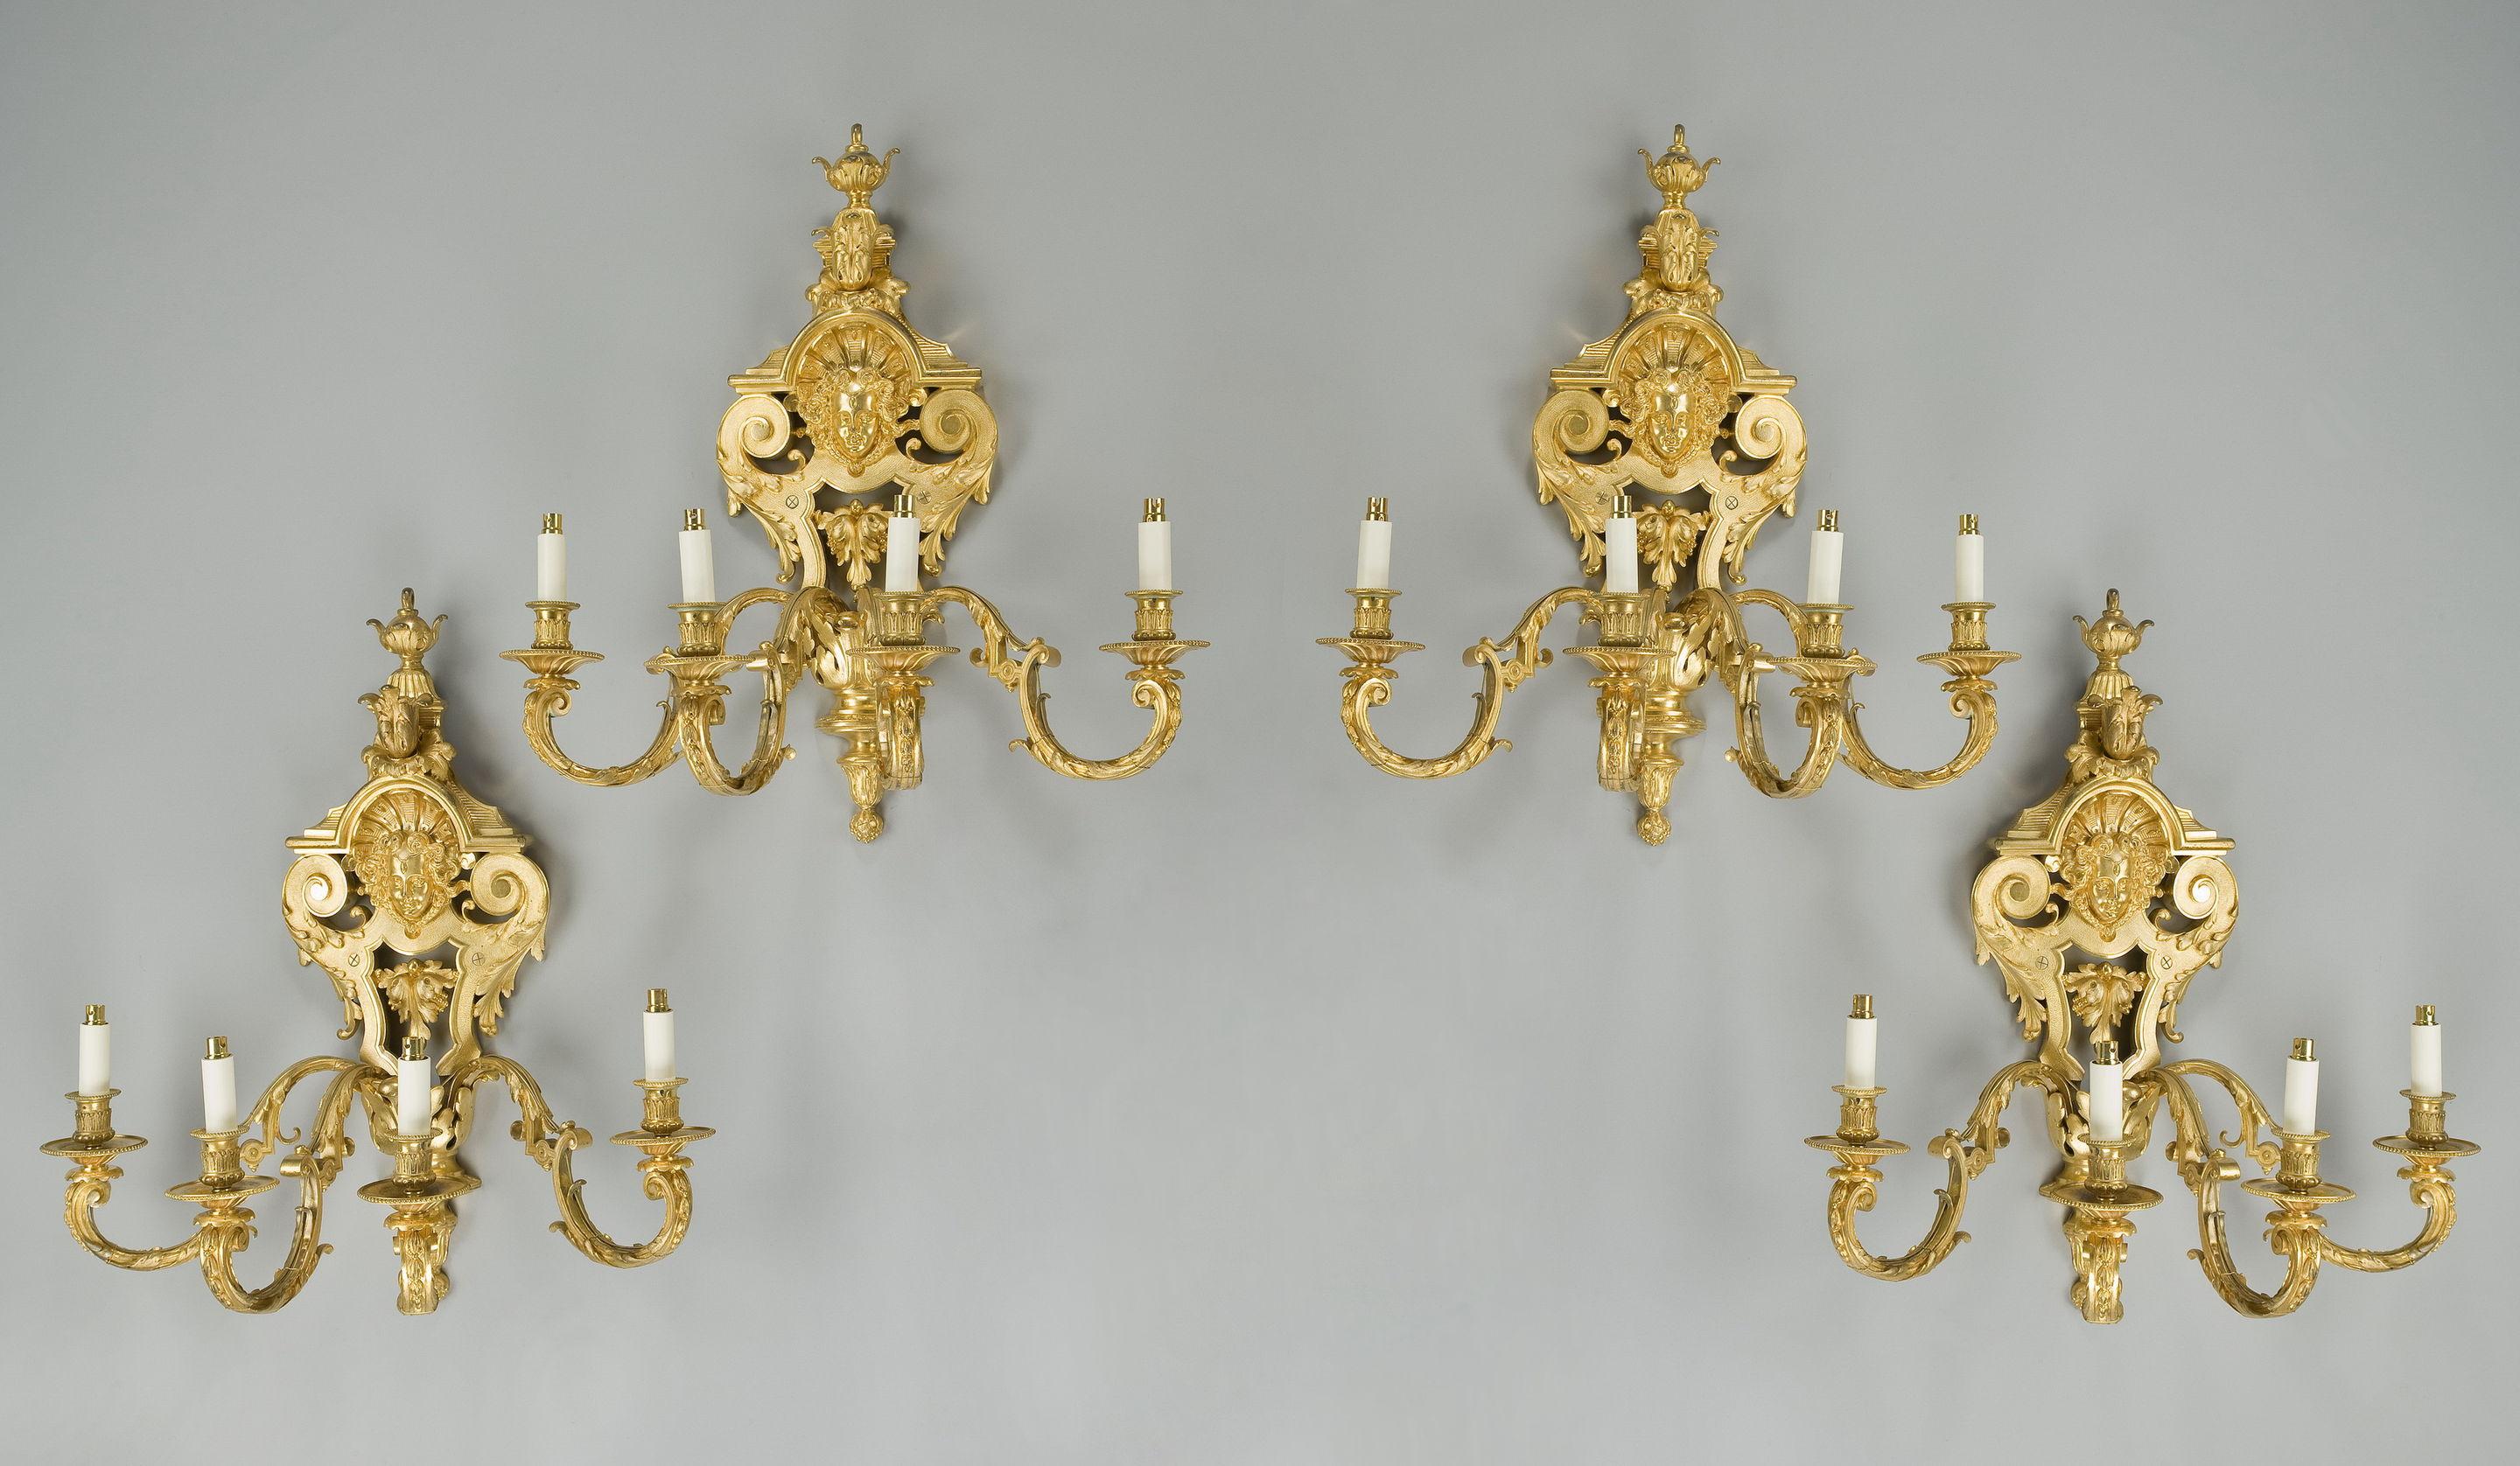 A set, each of these four fine French gilt wall lights includes a strapwork cartouche centred on a female mask below a leaf and urn finial and four supporting c-scroll brackets. Signed ‘Rode a Paris’. Circa 1890.
 